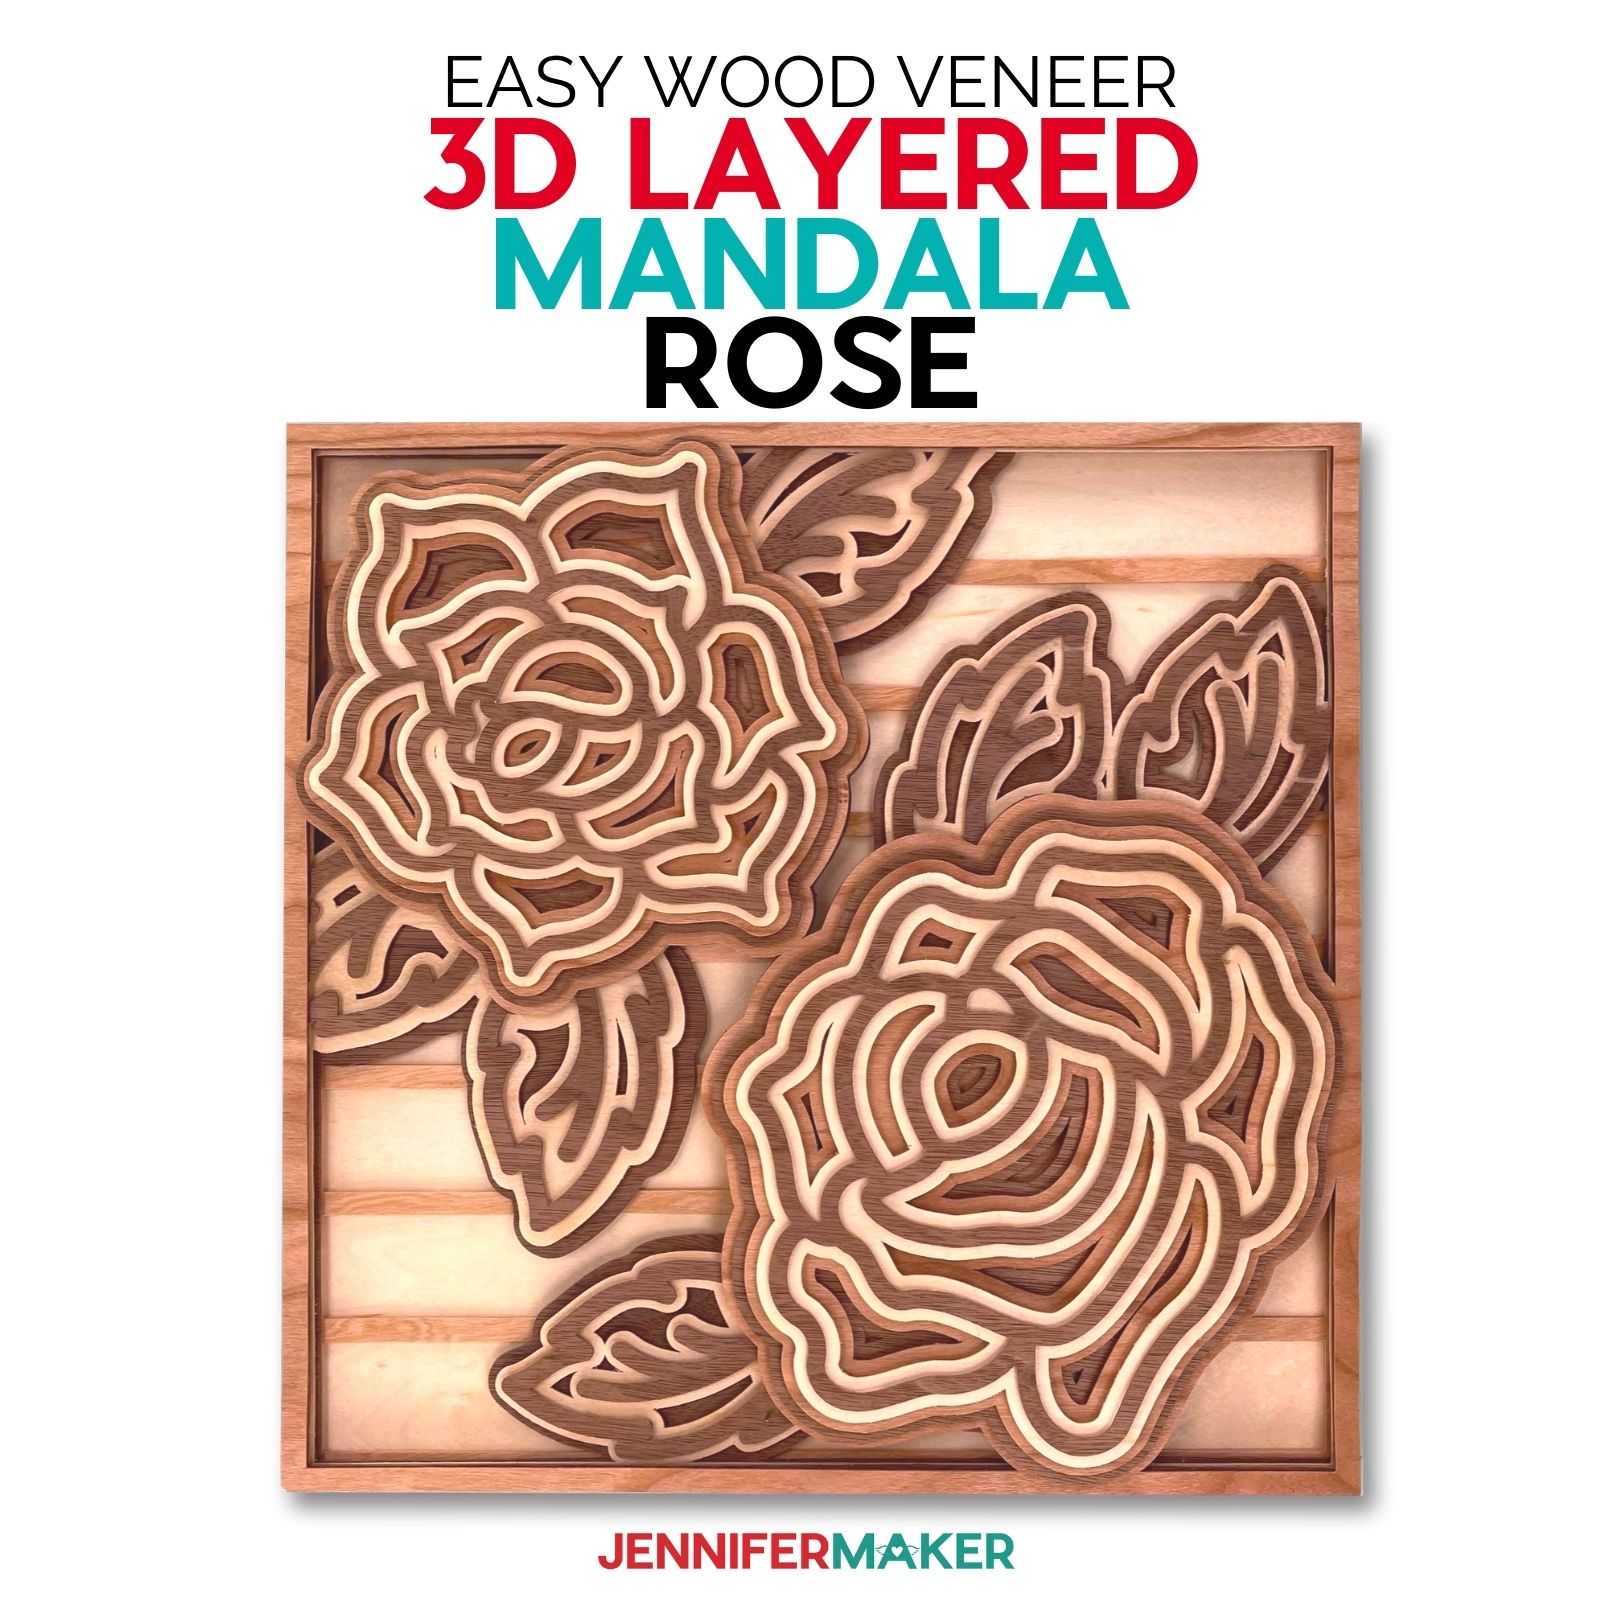 Finished 3D layered rose with wood veneer